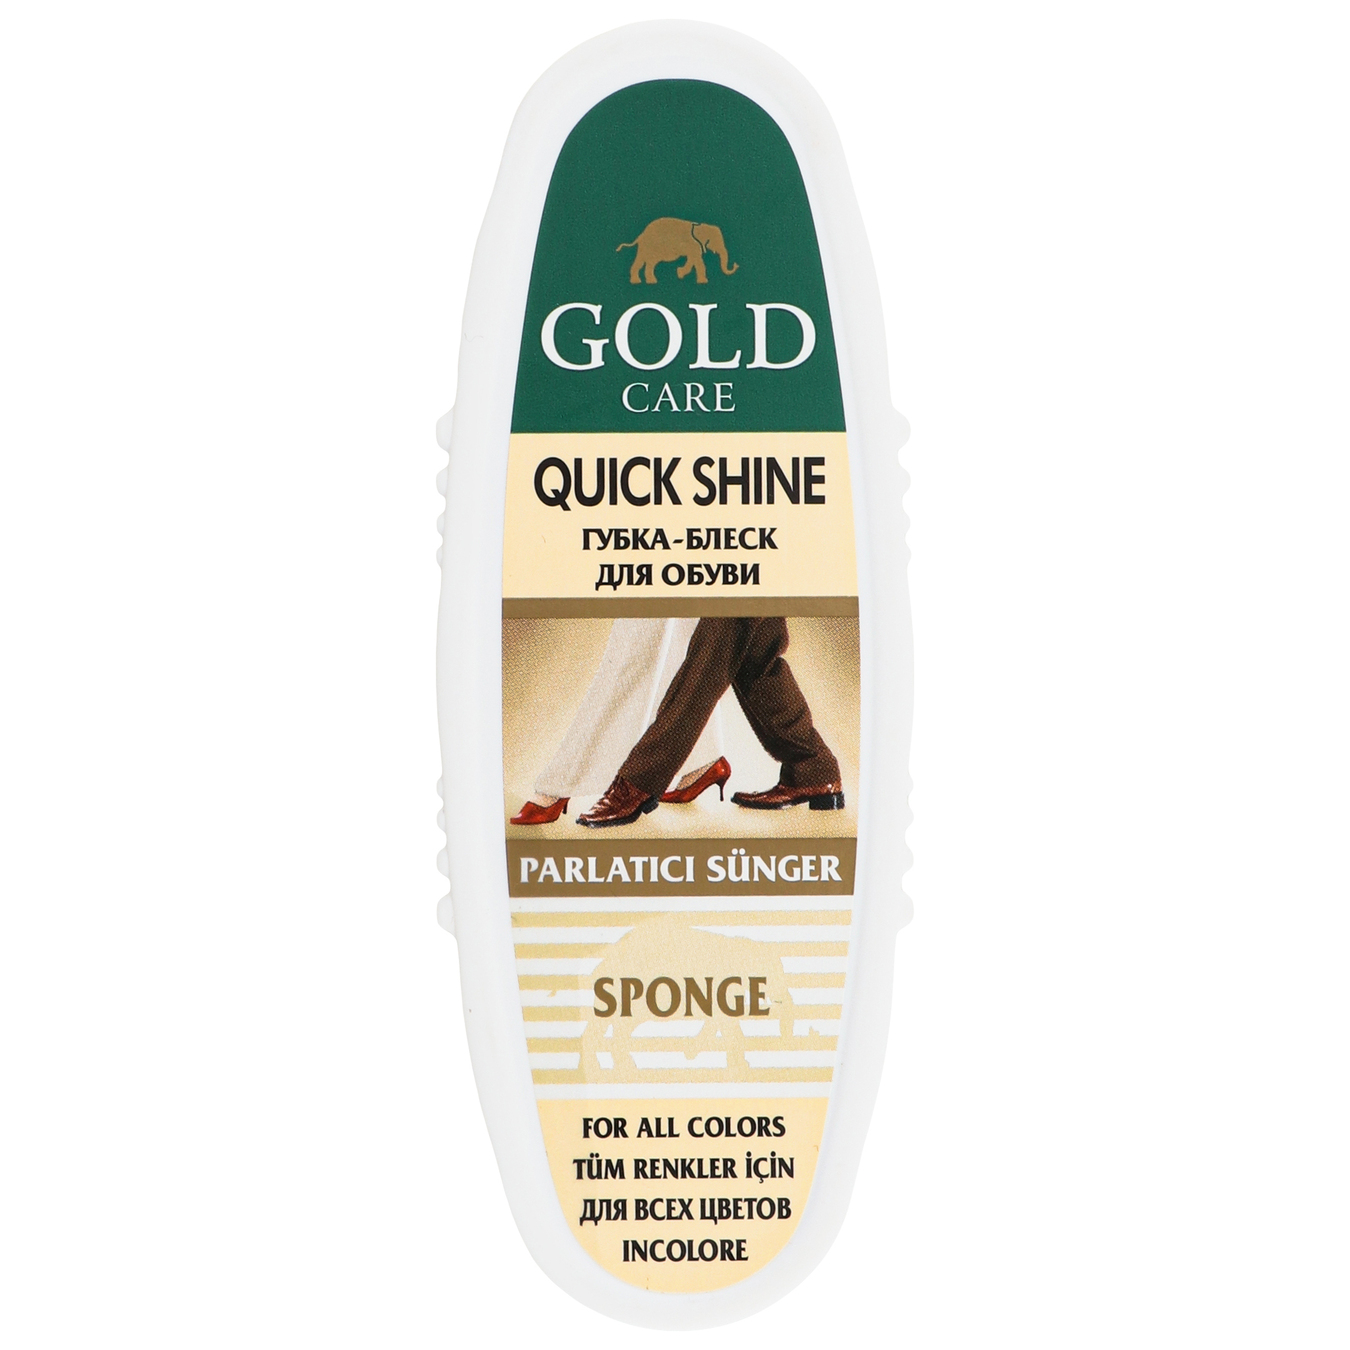 Sponge Gold Care for shining shoes